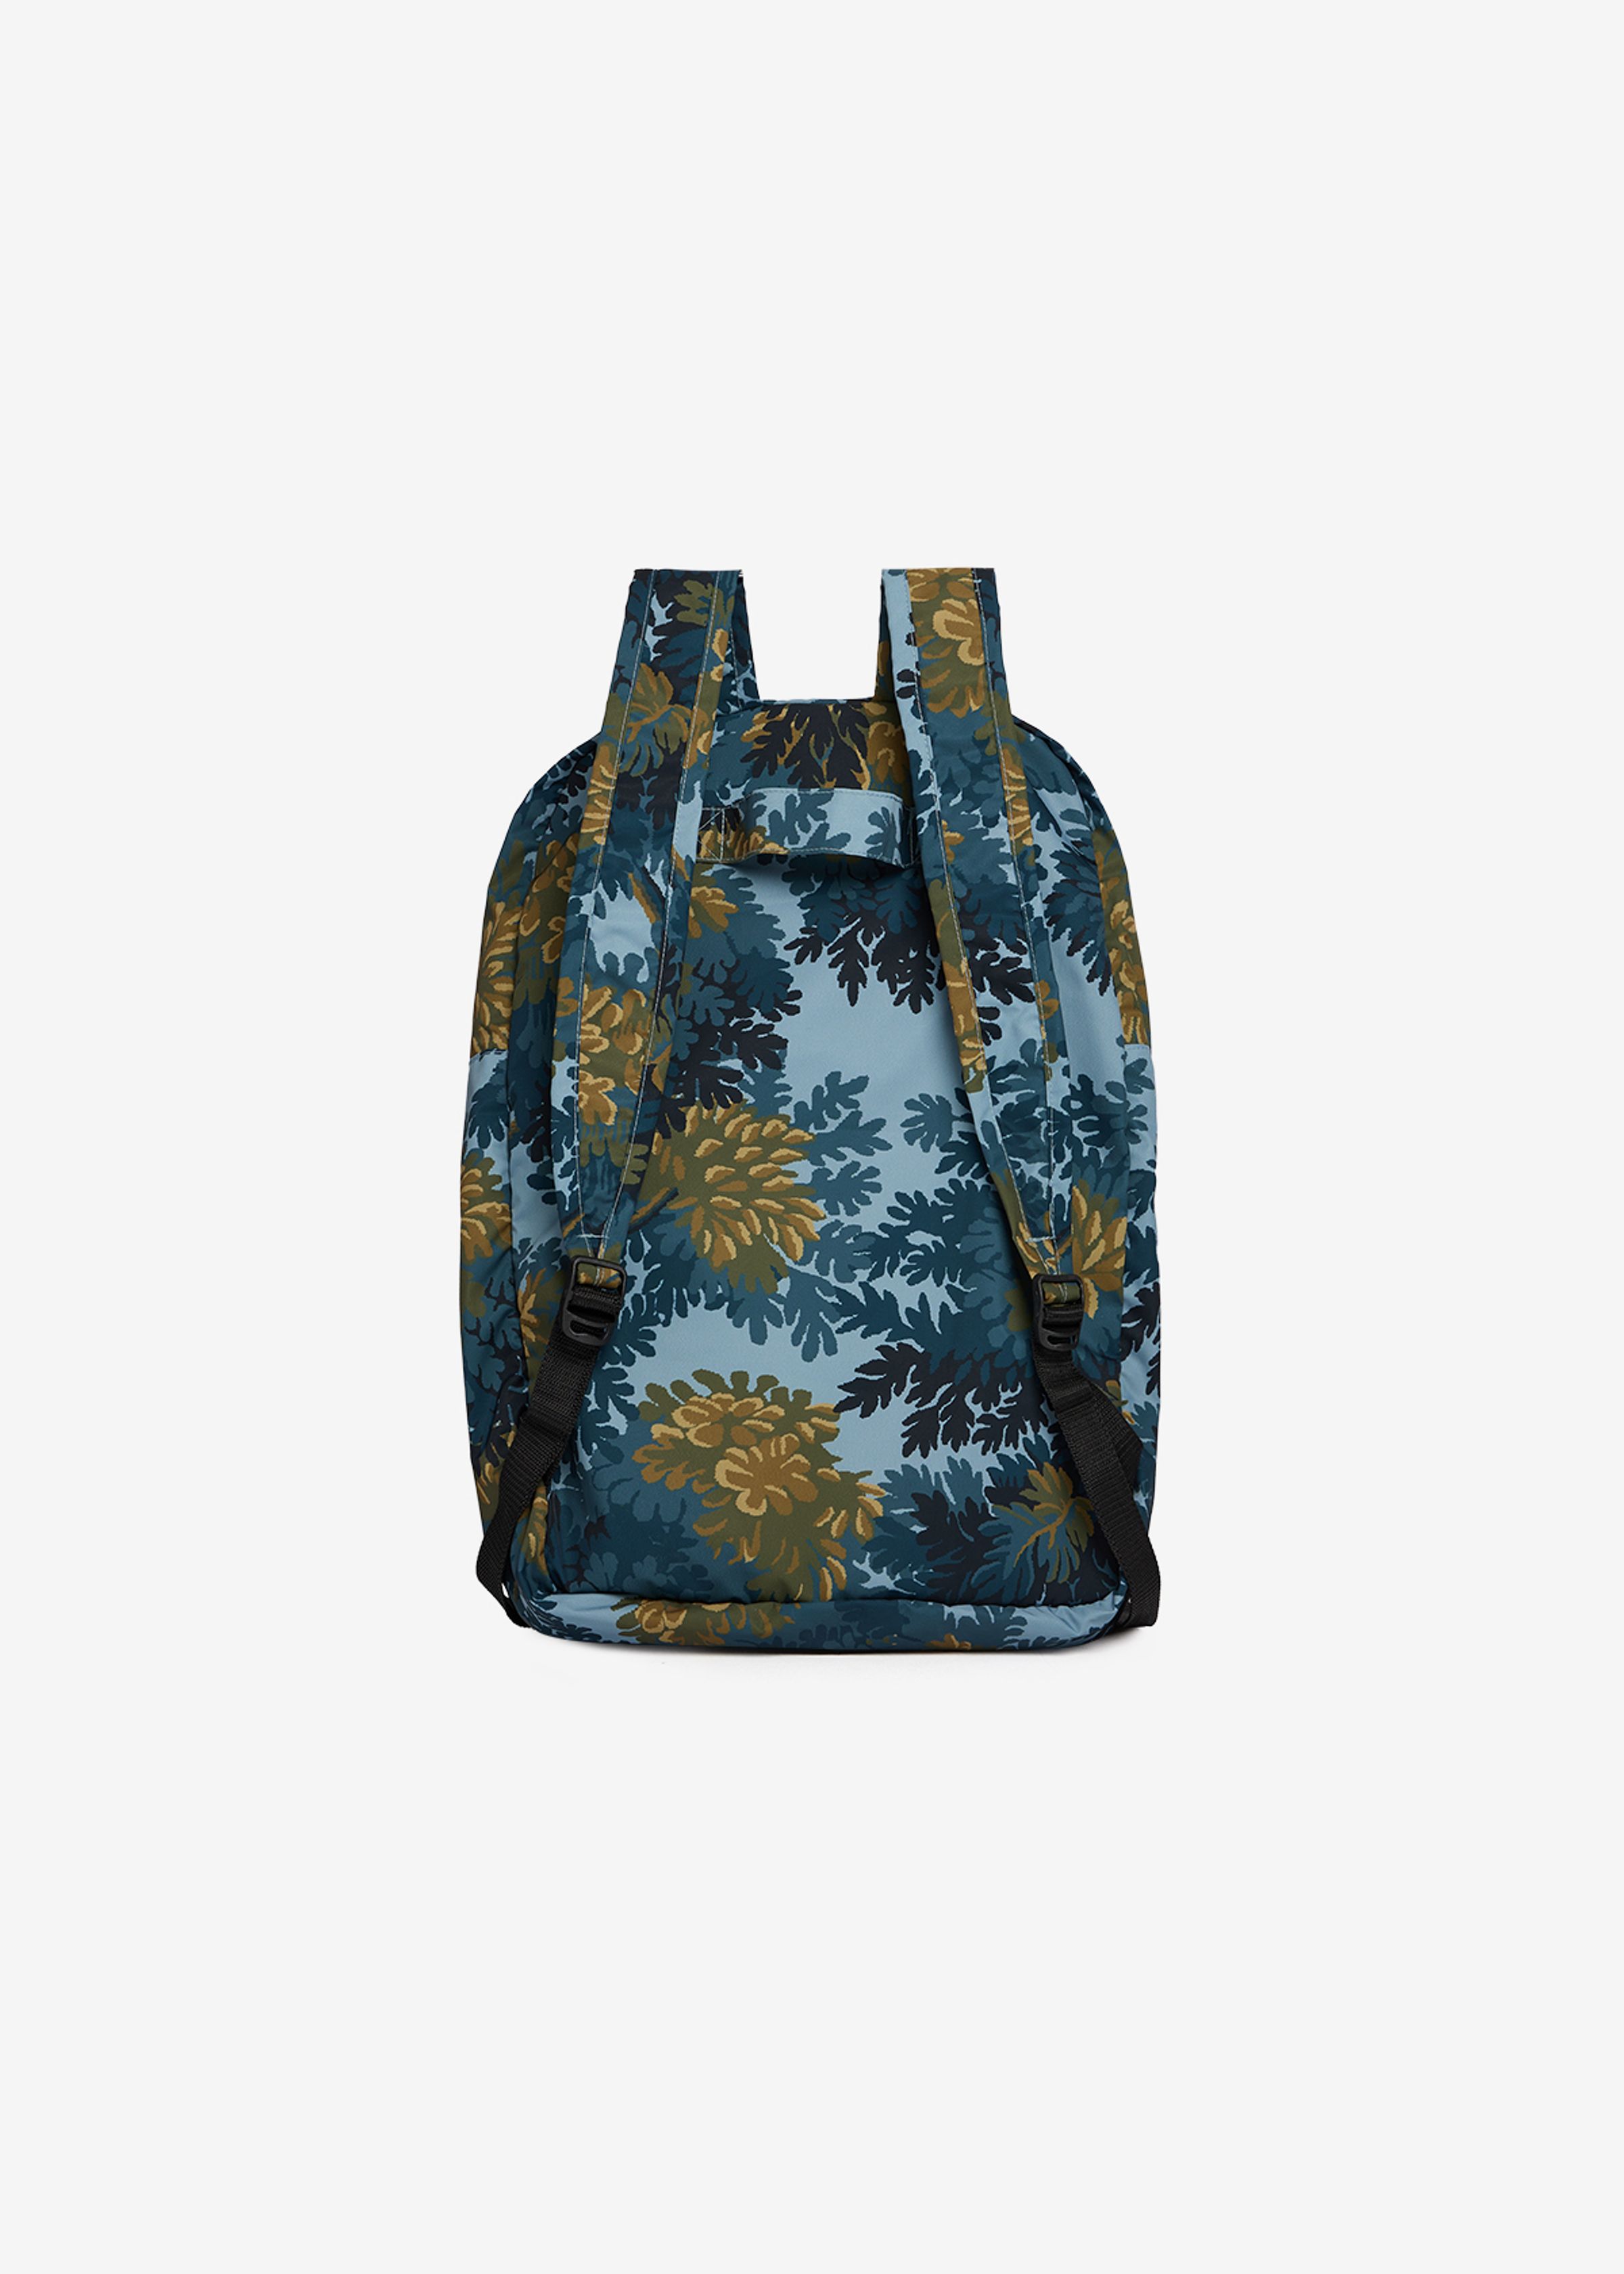 Backpack - Fontainebleau - Navy